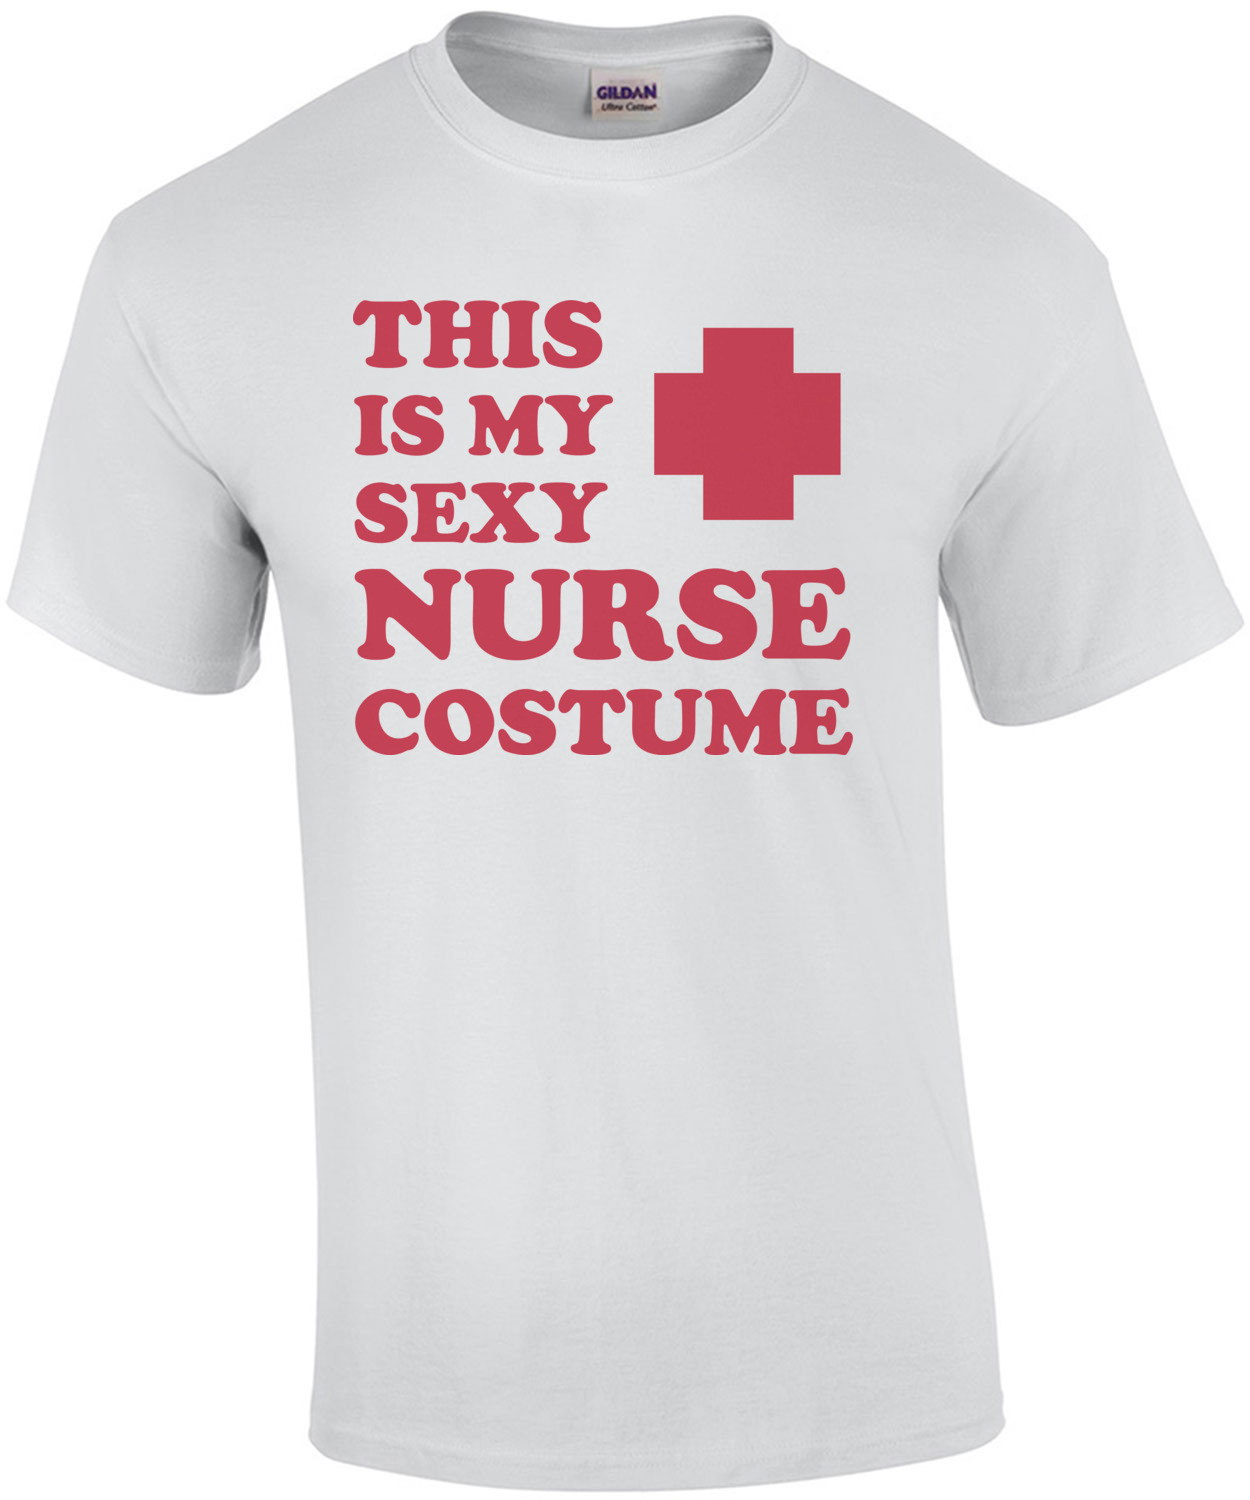 This is my sexy nurse costume t-shirt